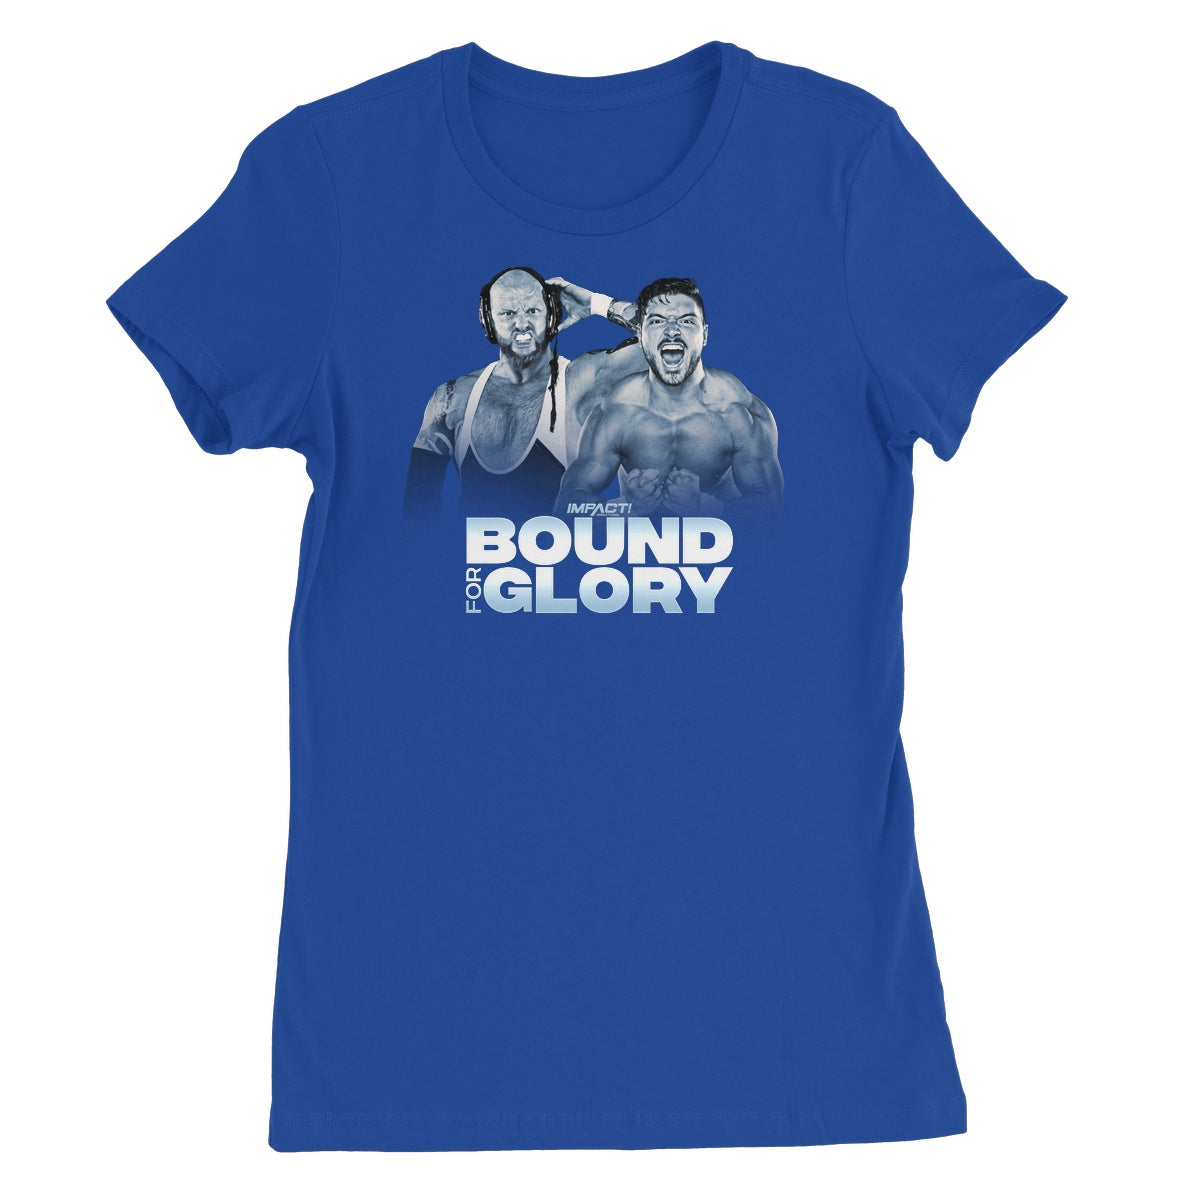 Bound For Glory 2020 - The North Women's Favourite T-Shirt